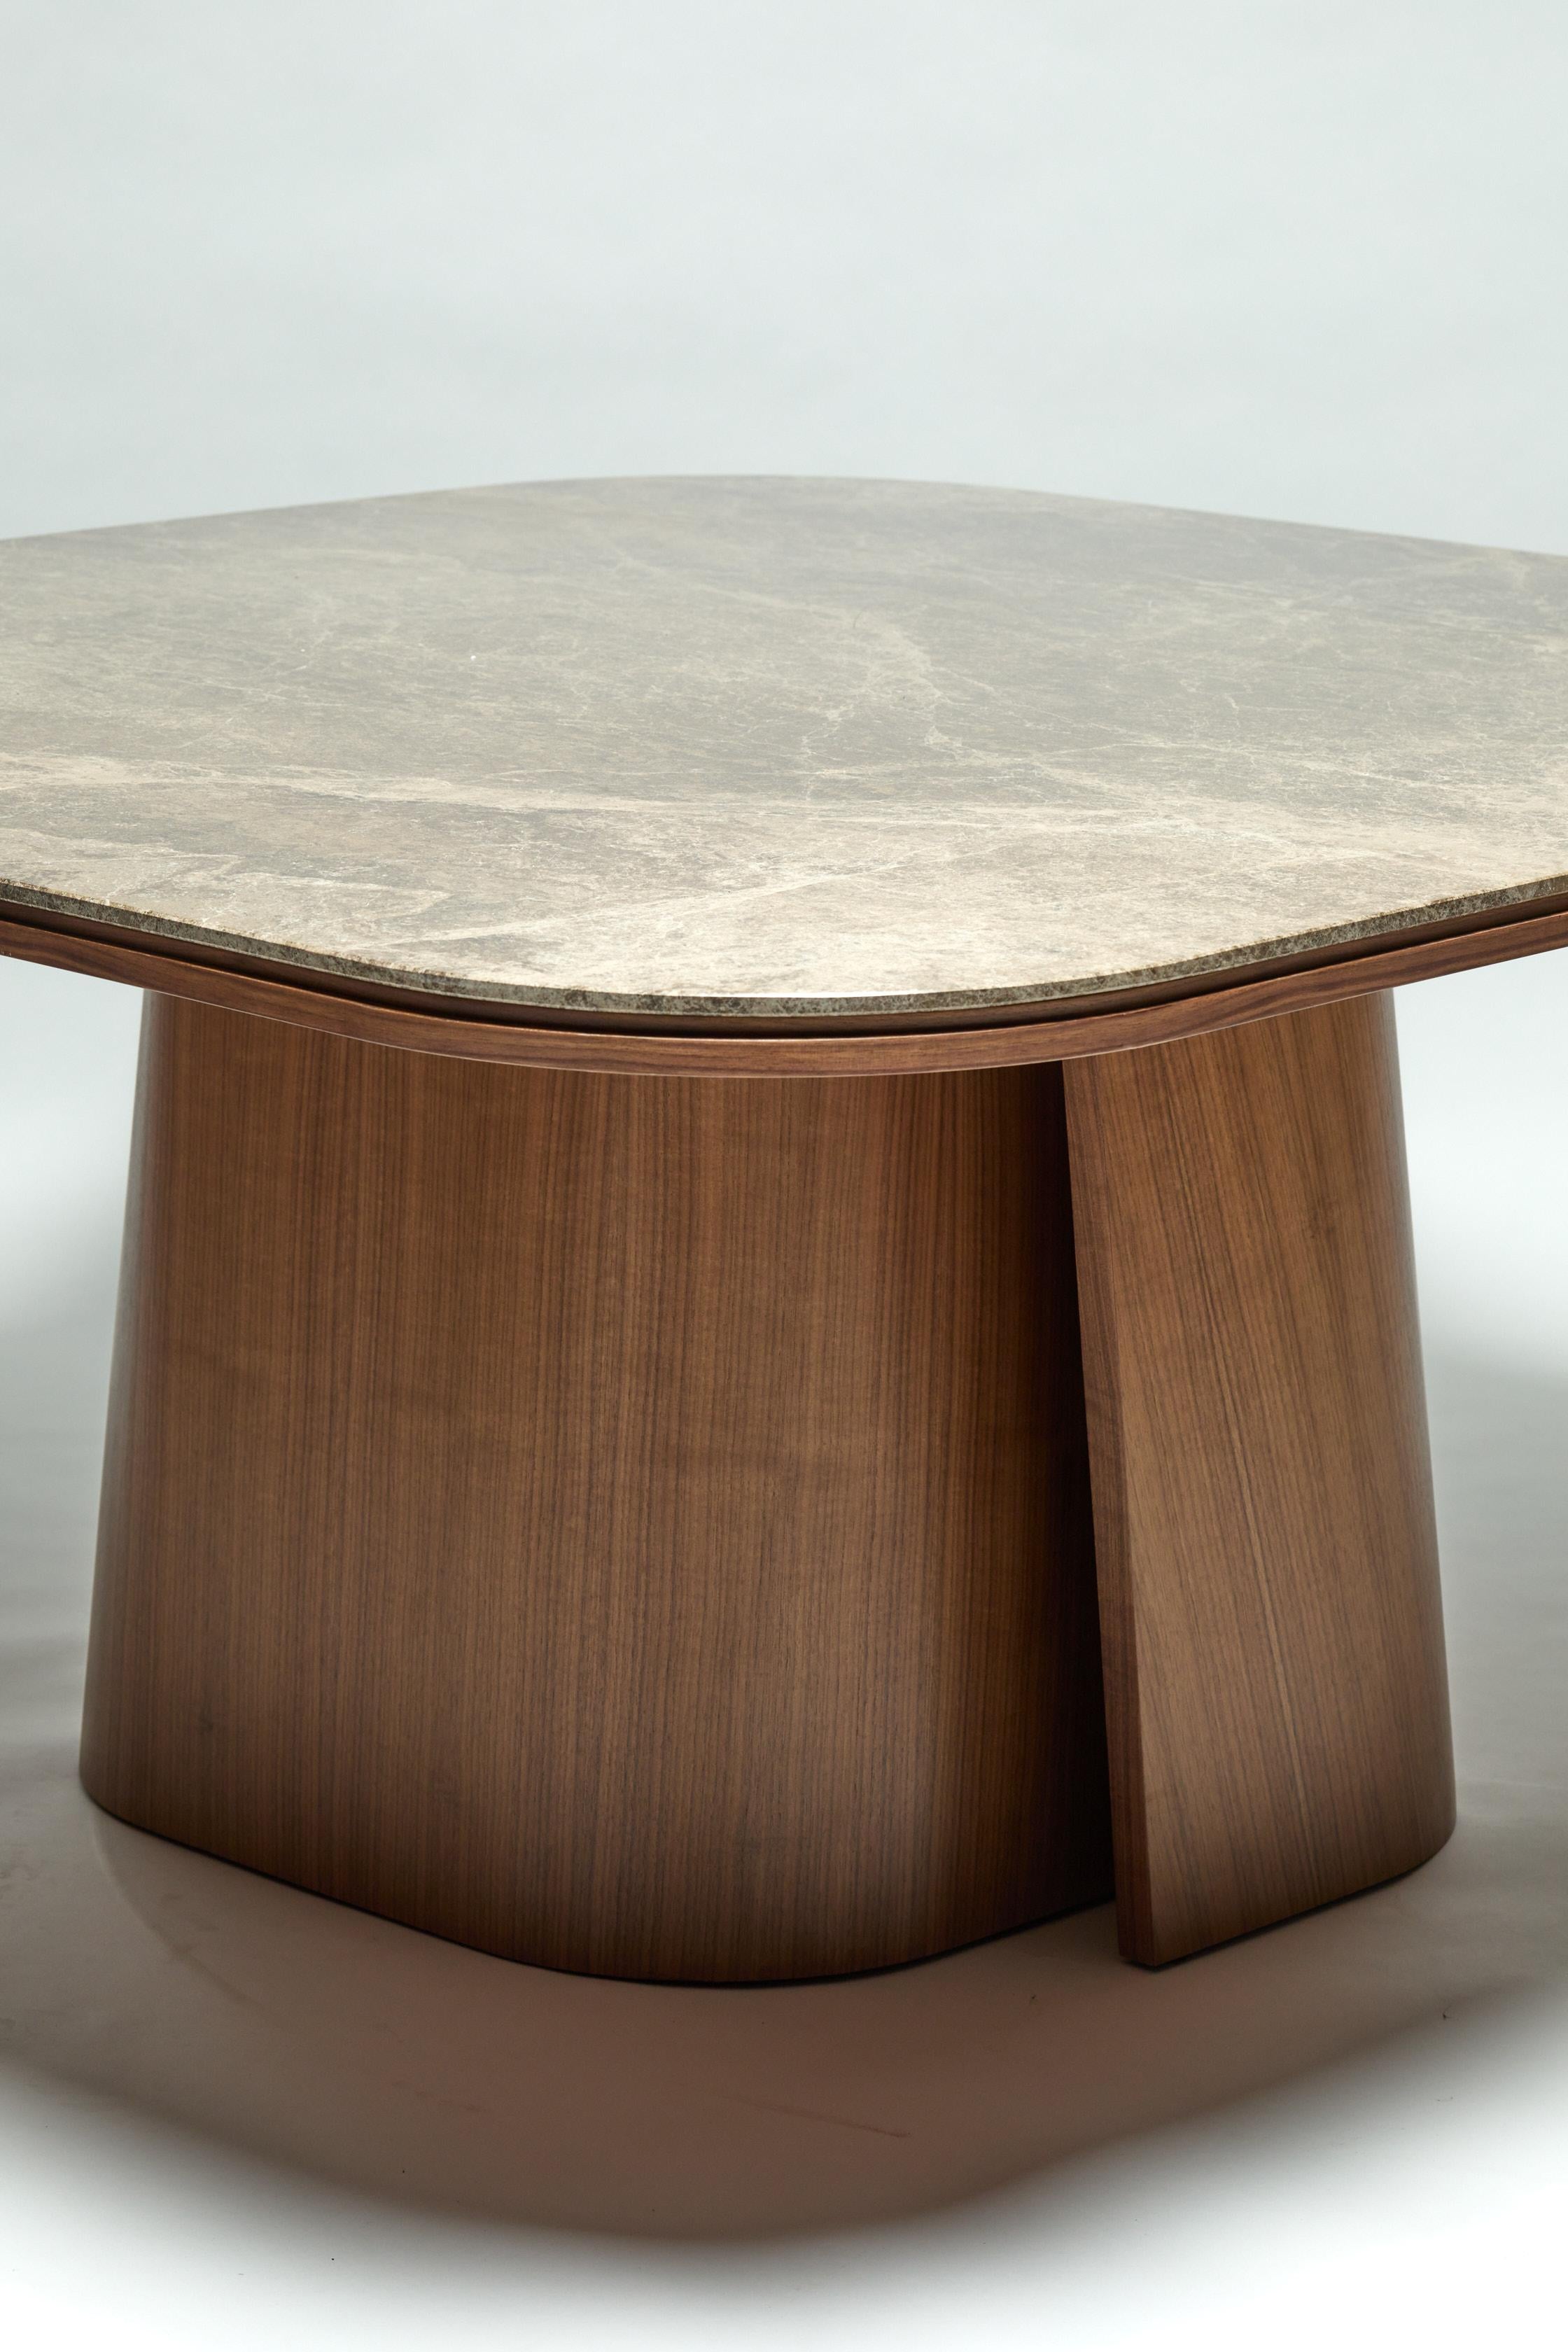 Modern Dining Table, OOMA, by Reda Amalou Design, 2020, Emperador Marble, 180 cm For Sale